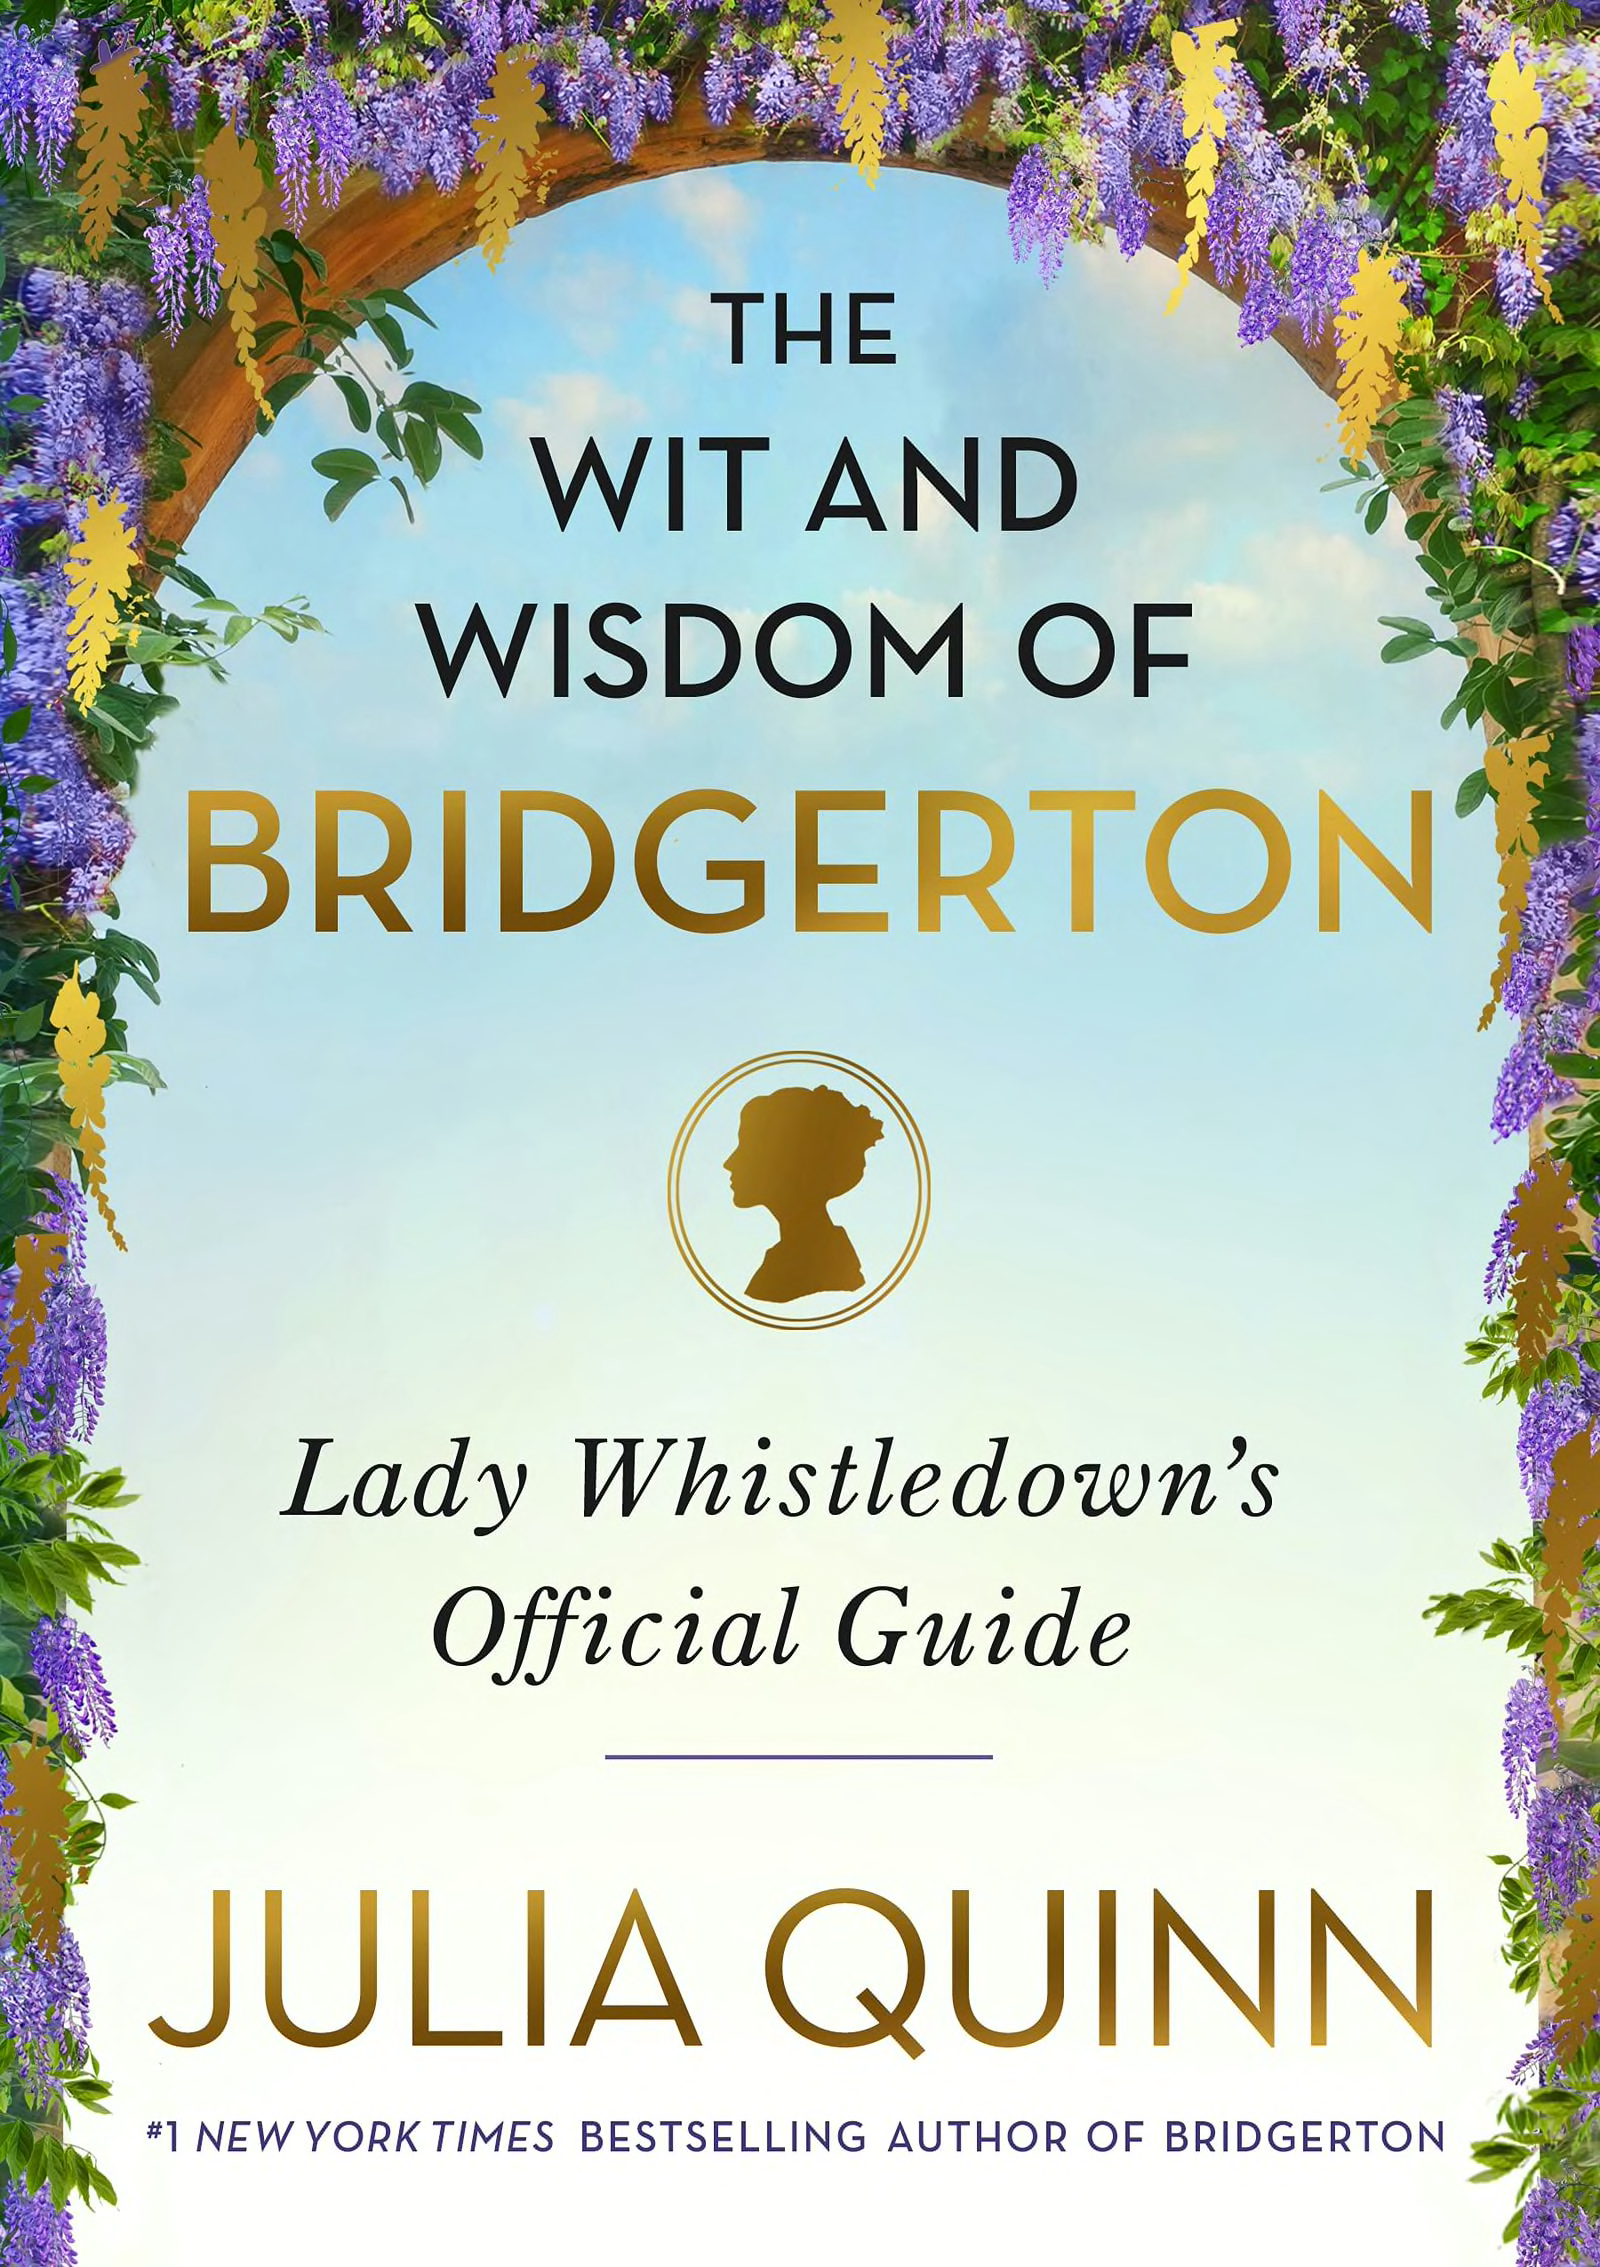 Discover Avon's 'The Wit and Wisdom of Bridgerton: Lady Whistledown's Official Guide' by Julia Quinn now available on Amazon.